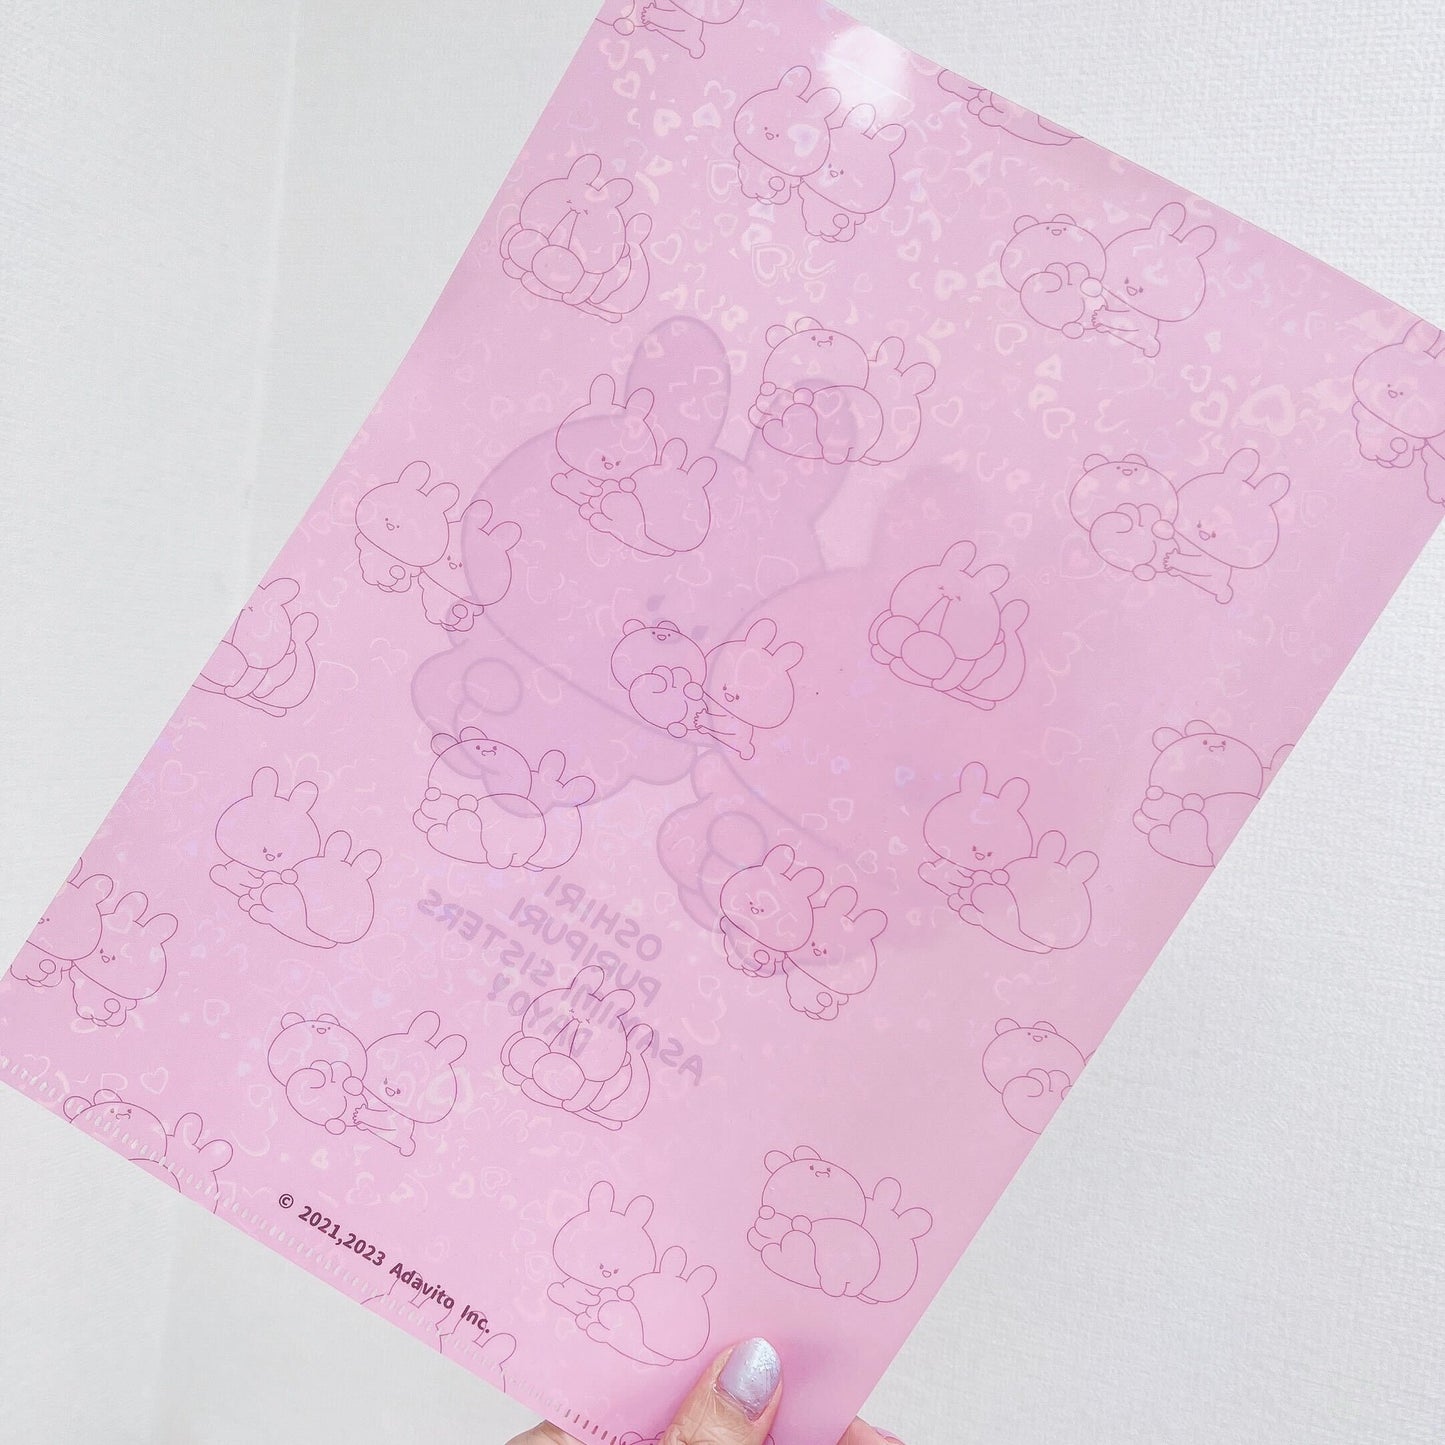 [Asamimi-chan] Glitter A4 clear file [shipped in early March]